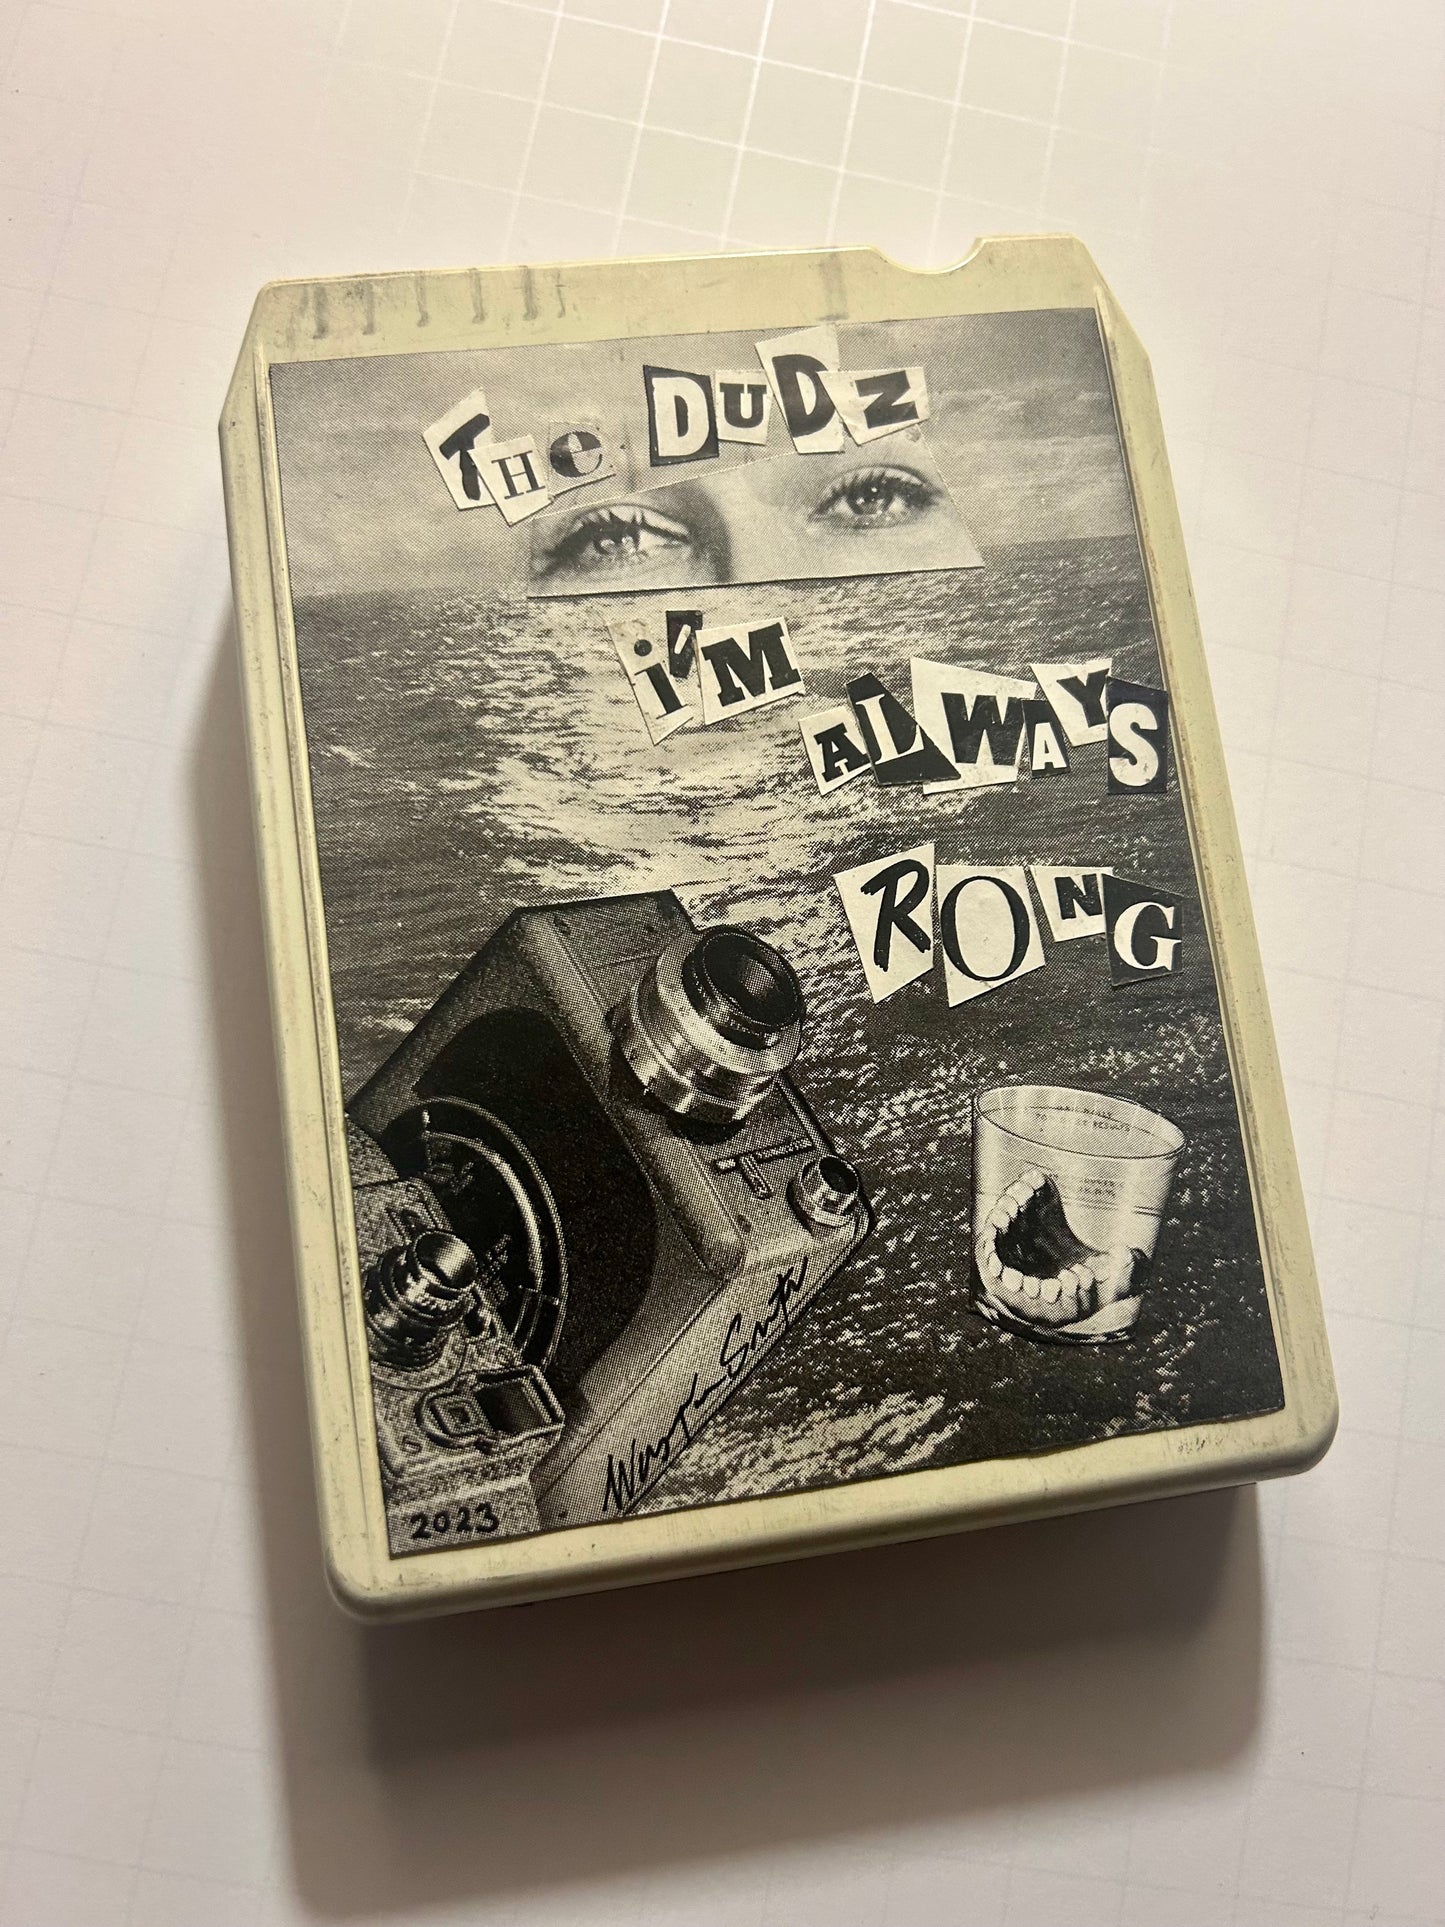 Winston Smith "The Duds - I'm Always Rong" 8-Track (2023)